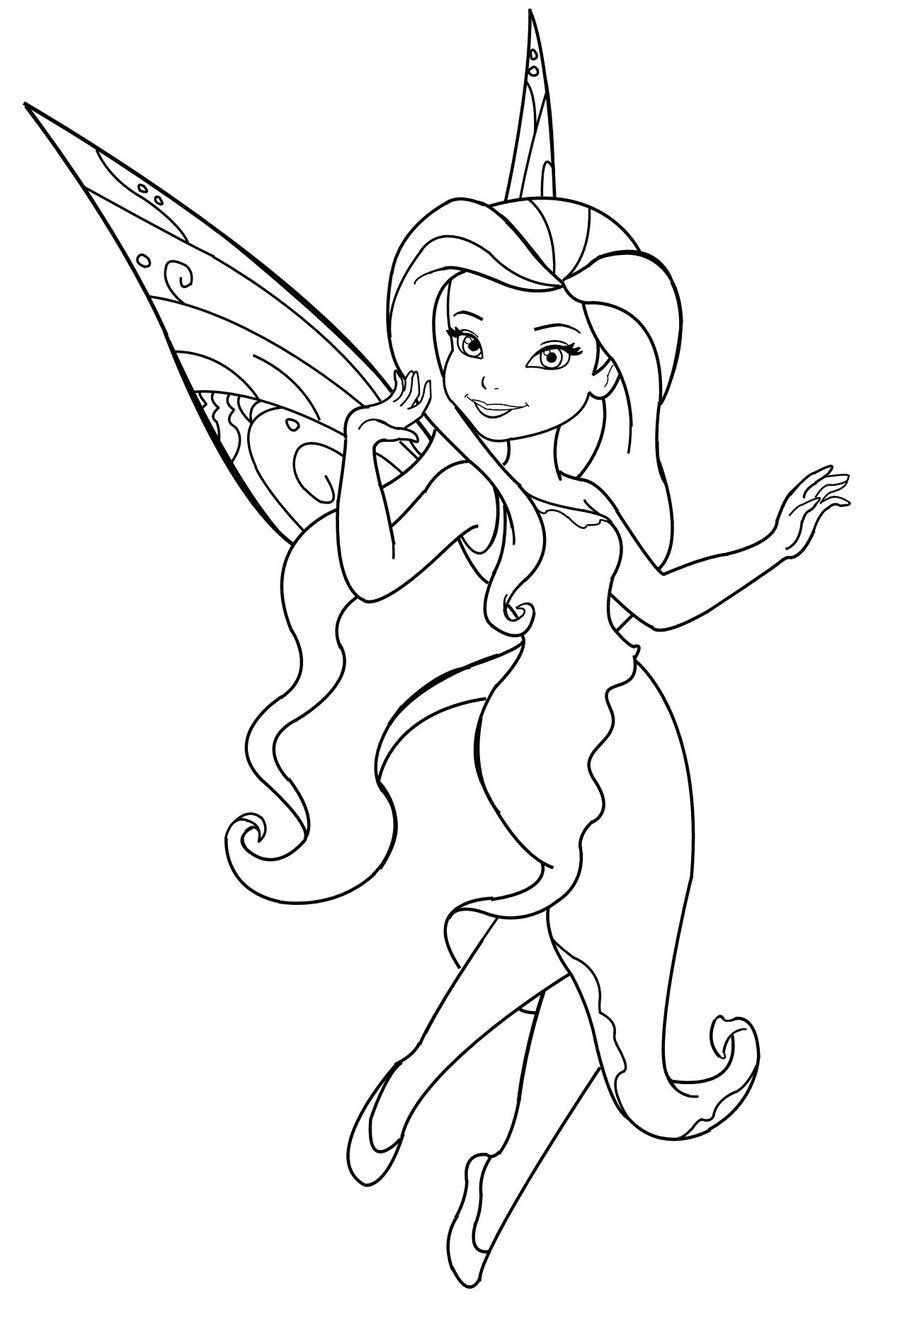 Coloring Pages For Girls Fairies
 Image was taken from a "Disney Fairies" Activity book